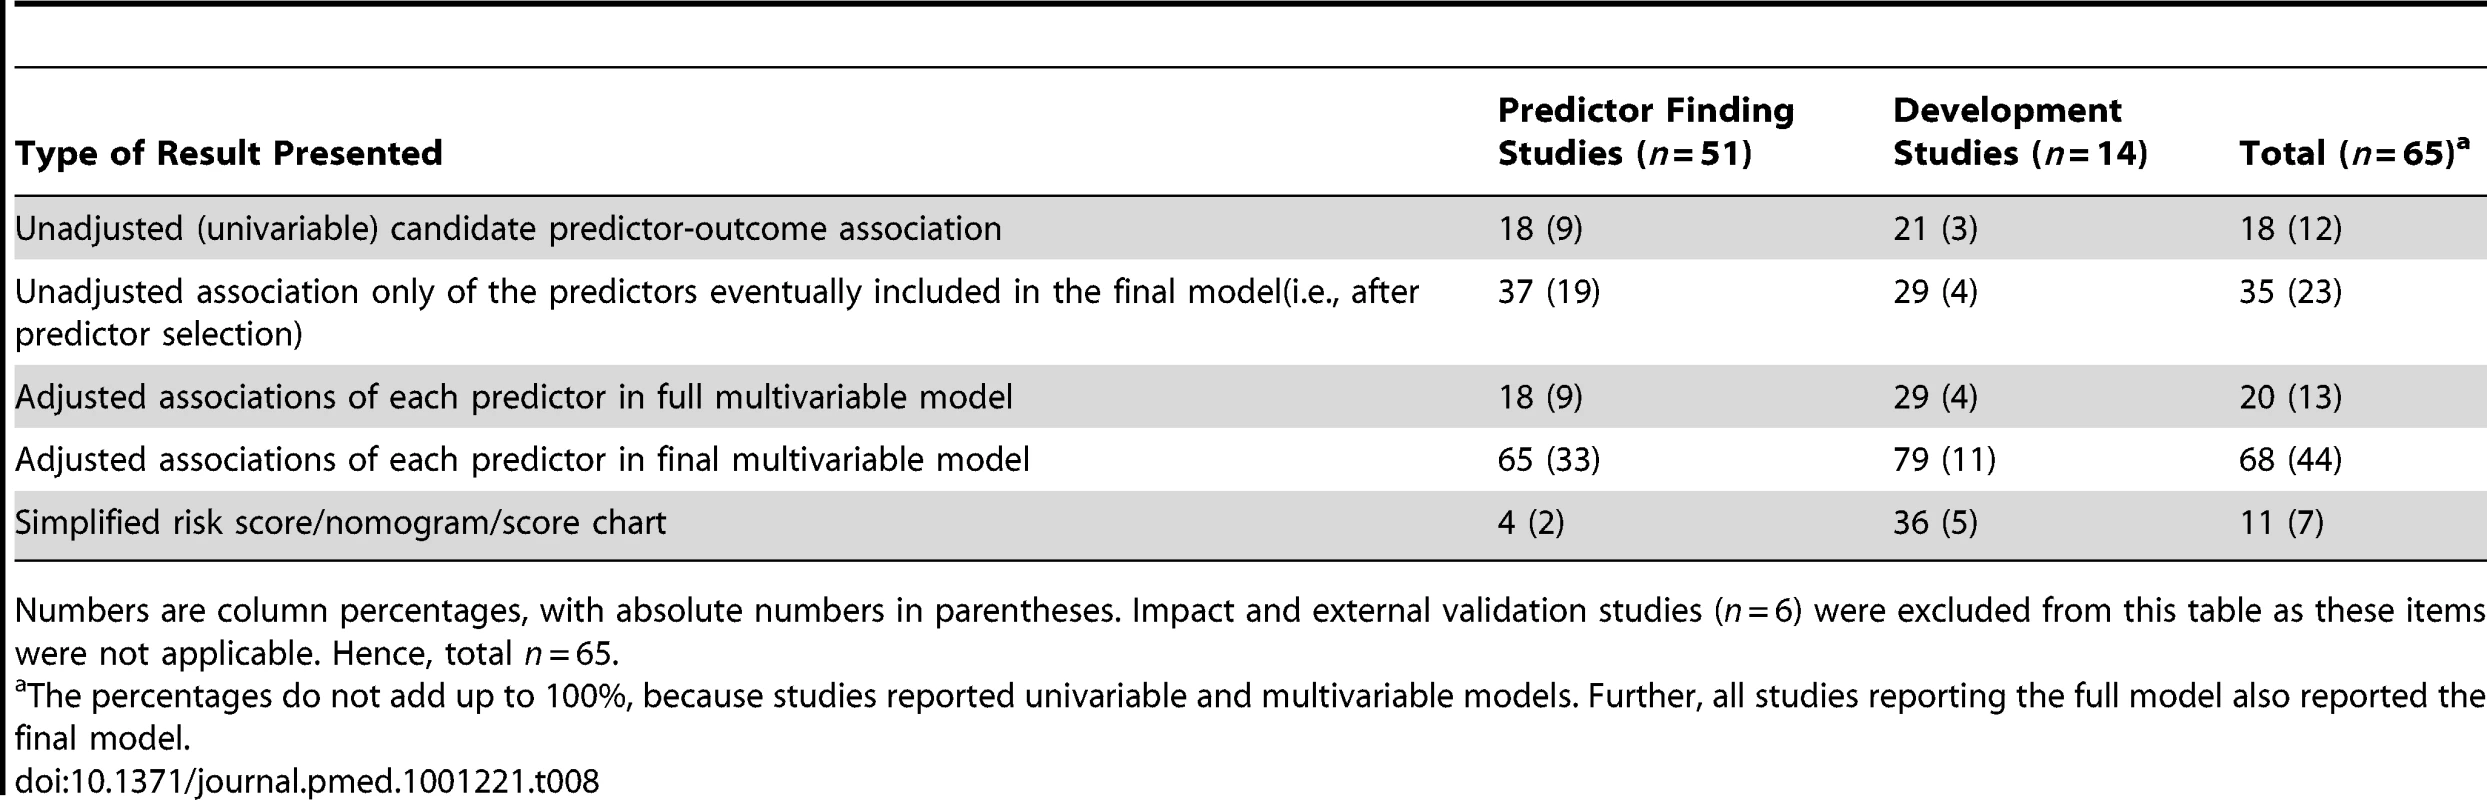 Presentation of the results, stratified by type of prediction study.